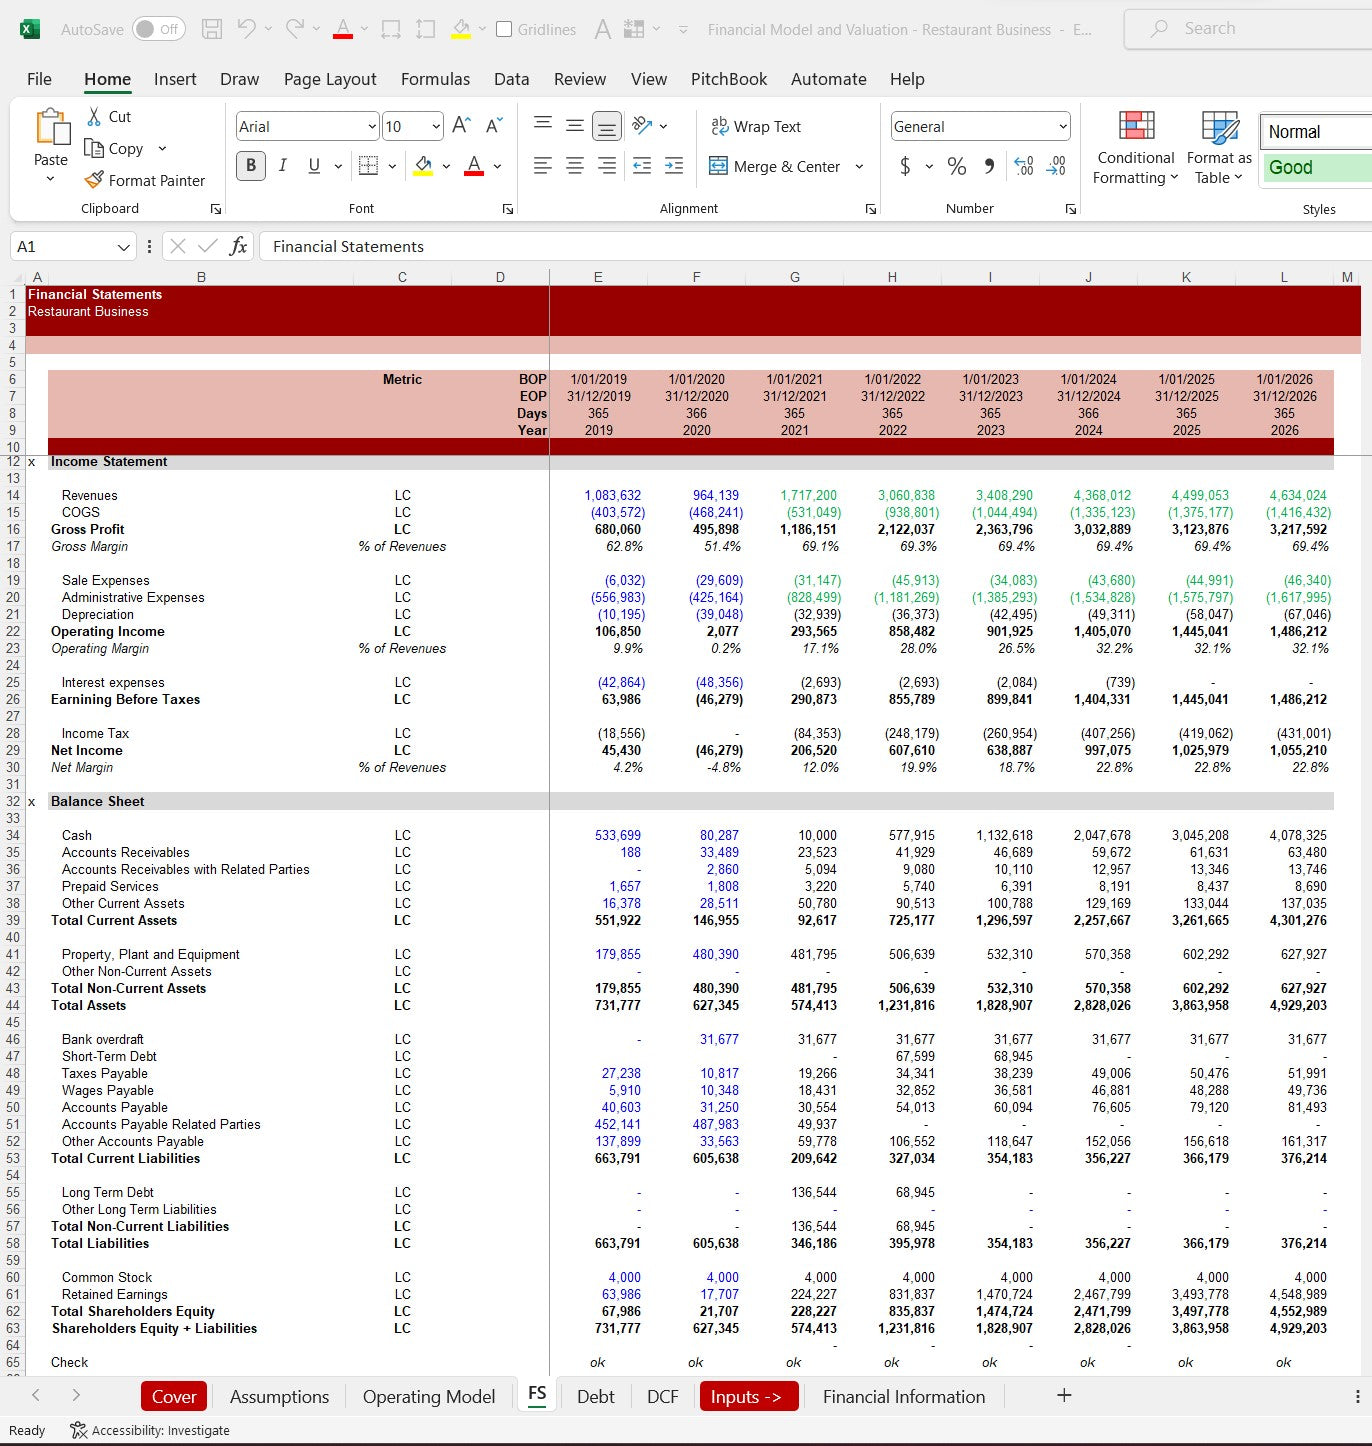 Restaurant Financial Model and Valuation Excel Spreadsheet Template. P&L and Balance Sheet snip